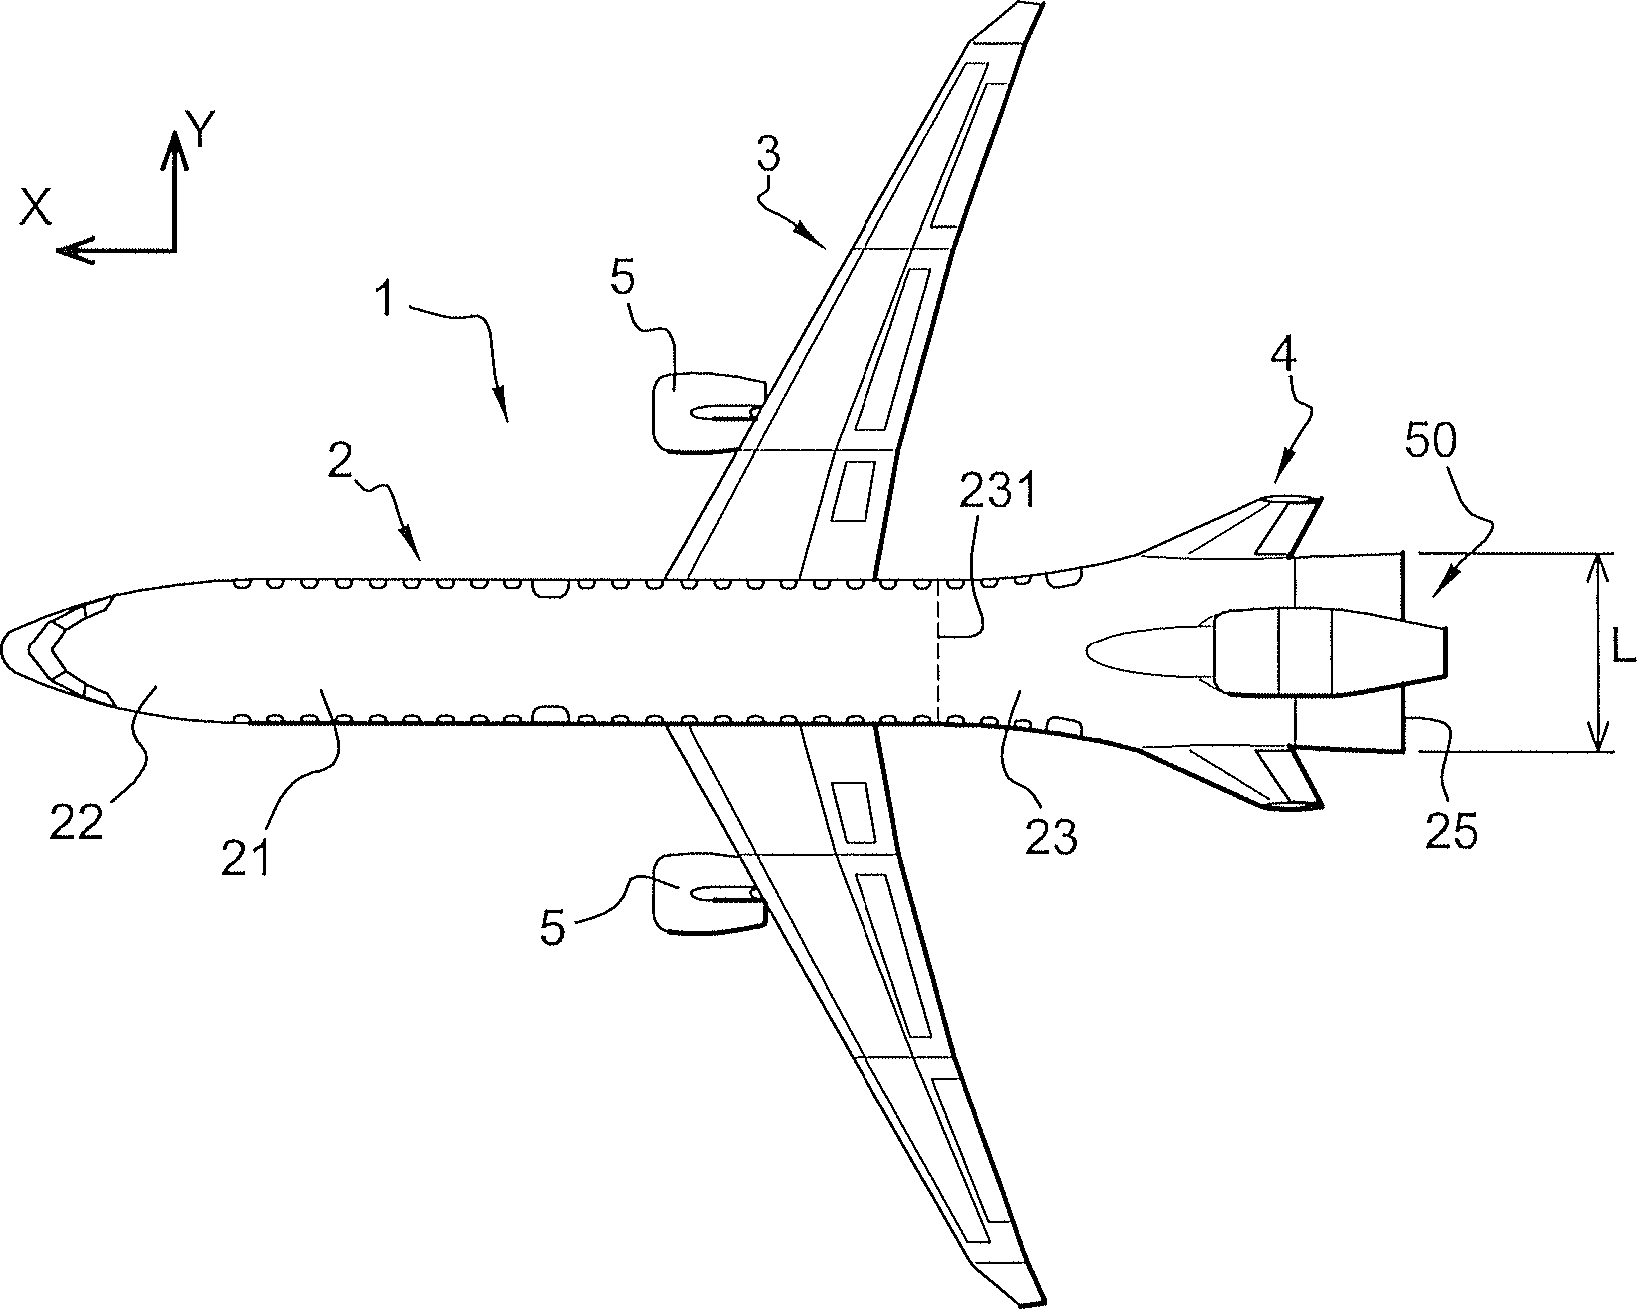 Airplane with tailcoat tail assembly and rear engine